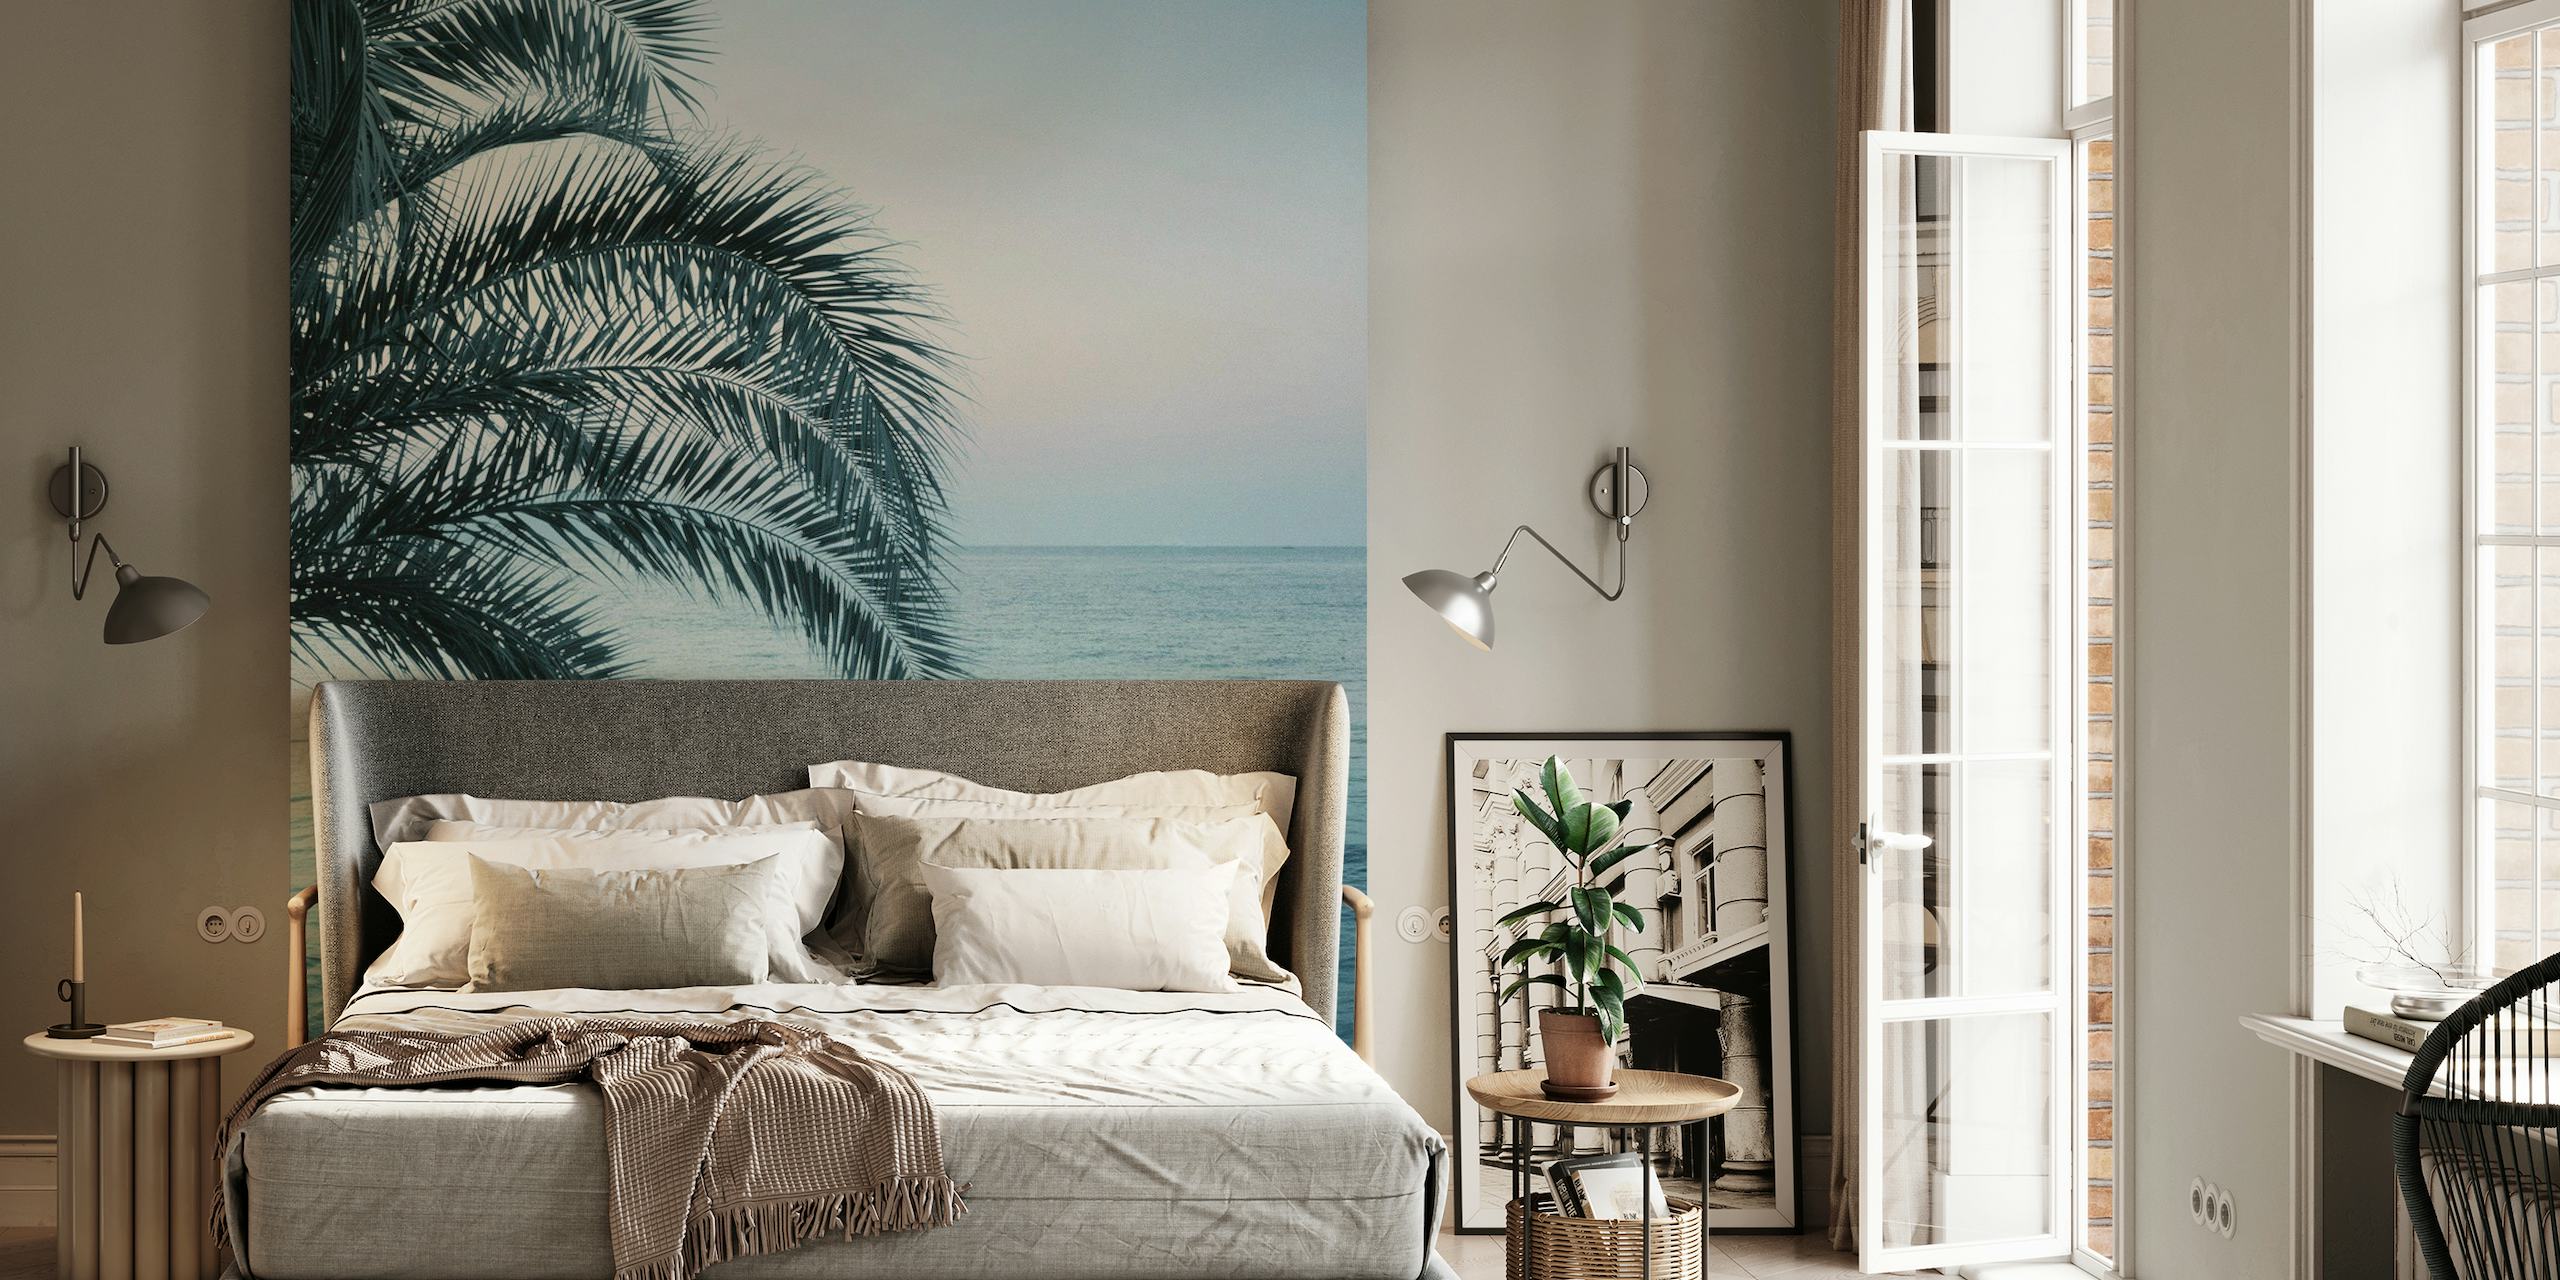 Palm silhouette over calm seascape wall mural